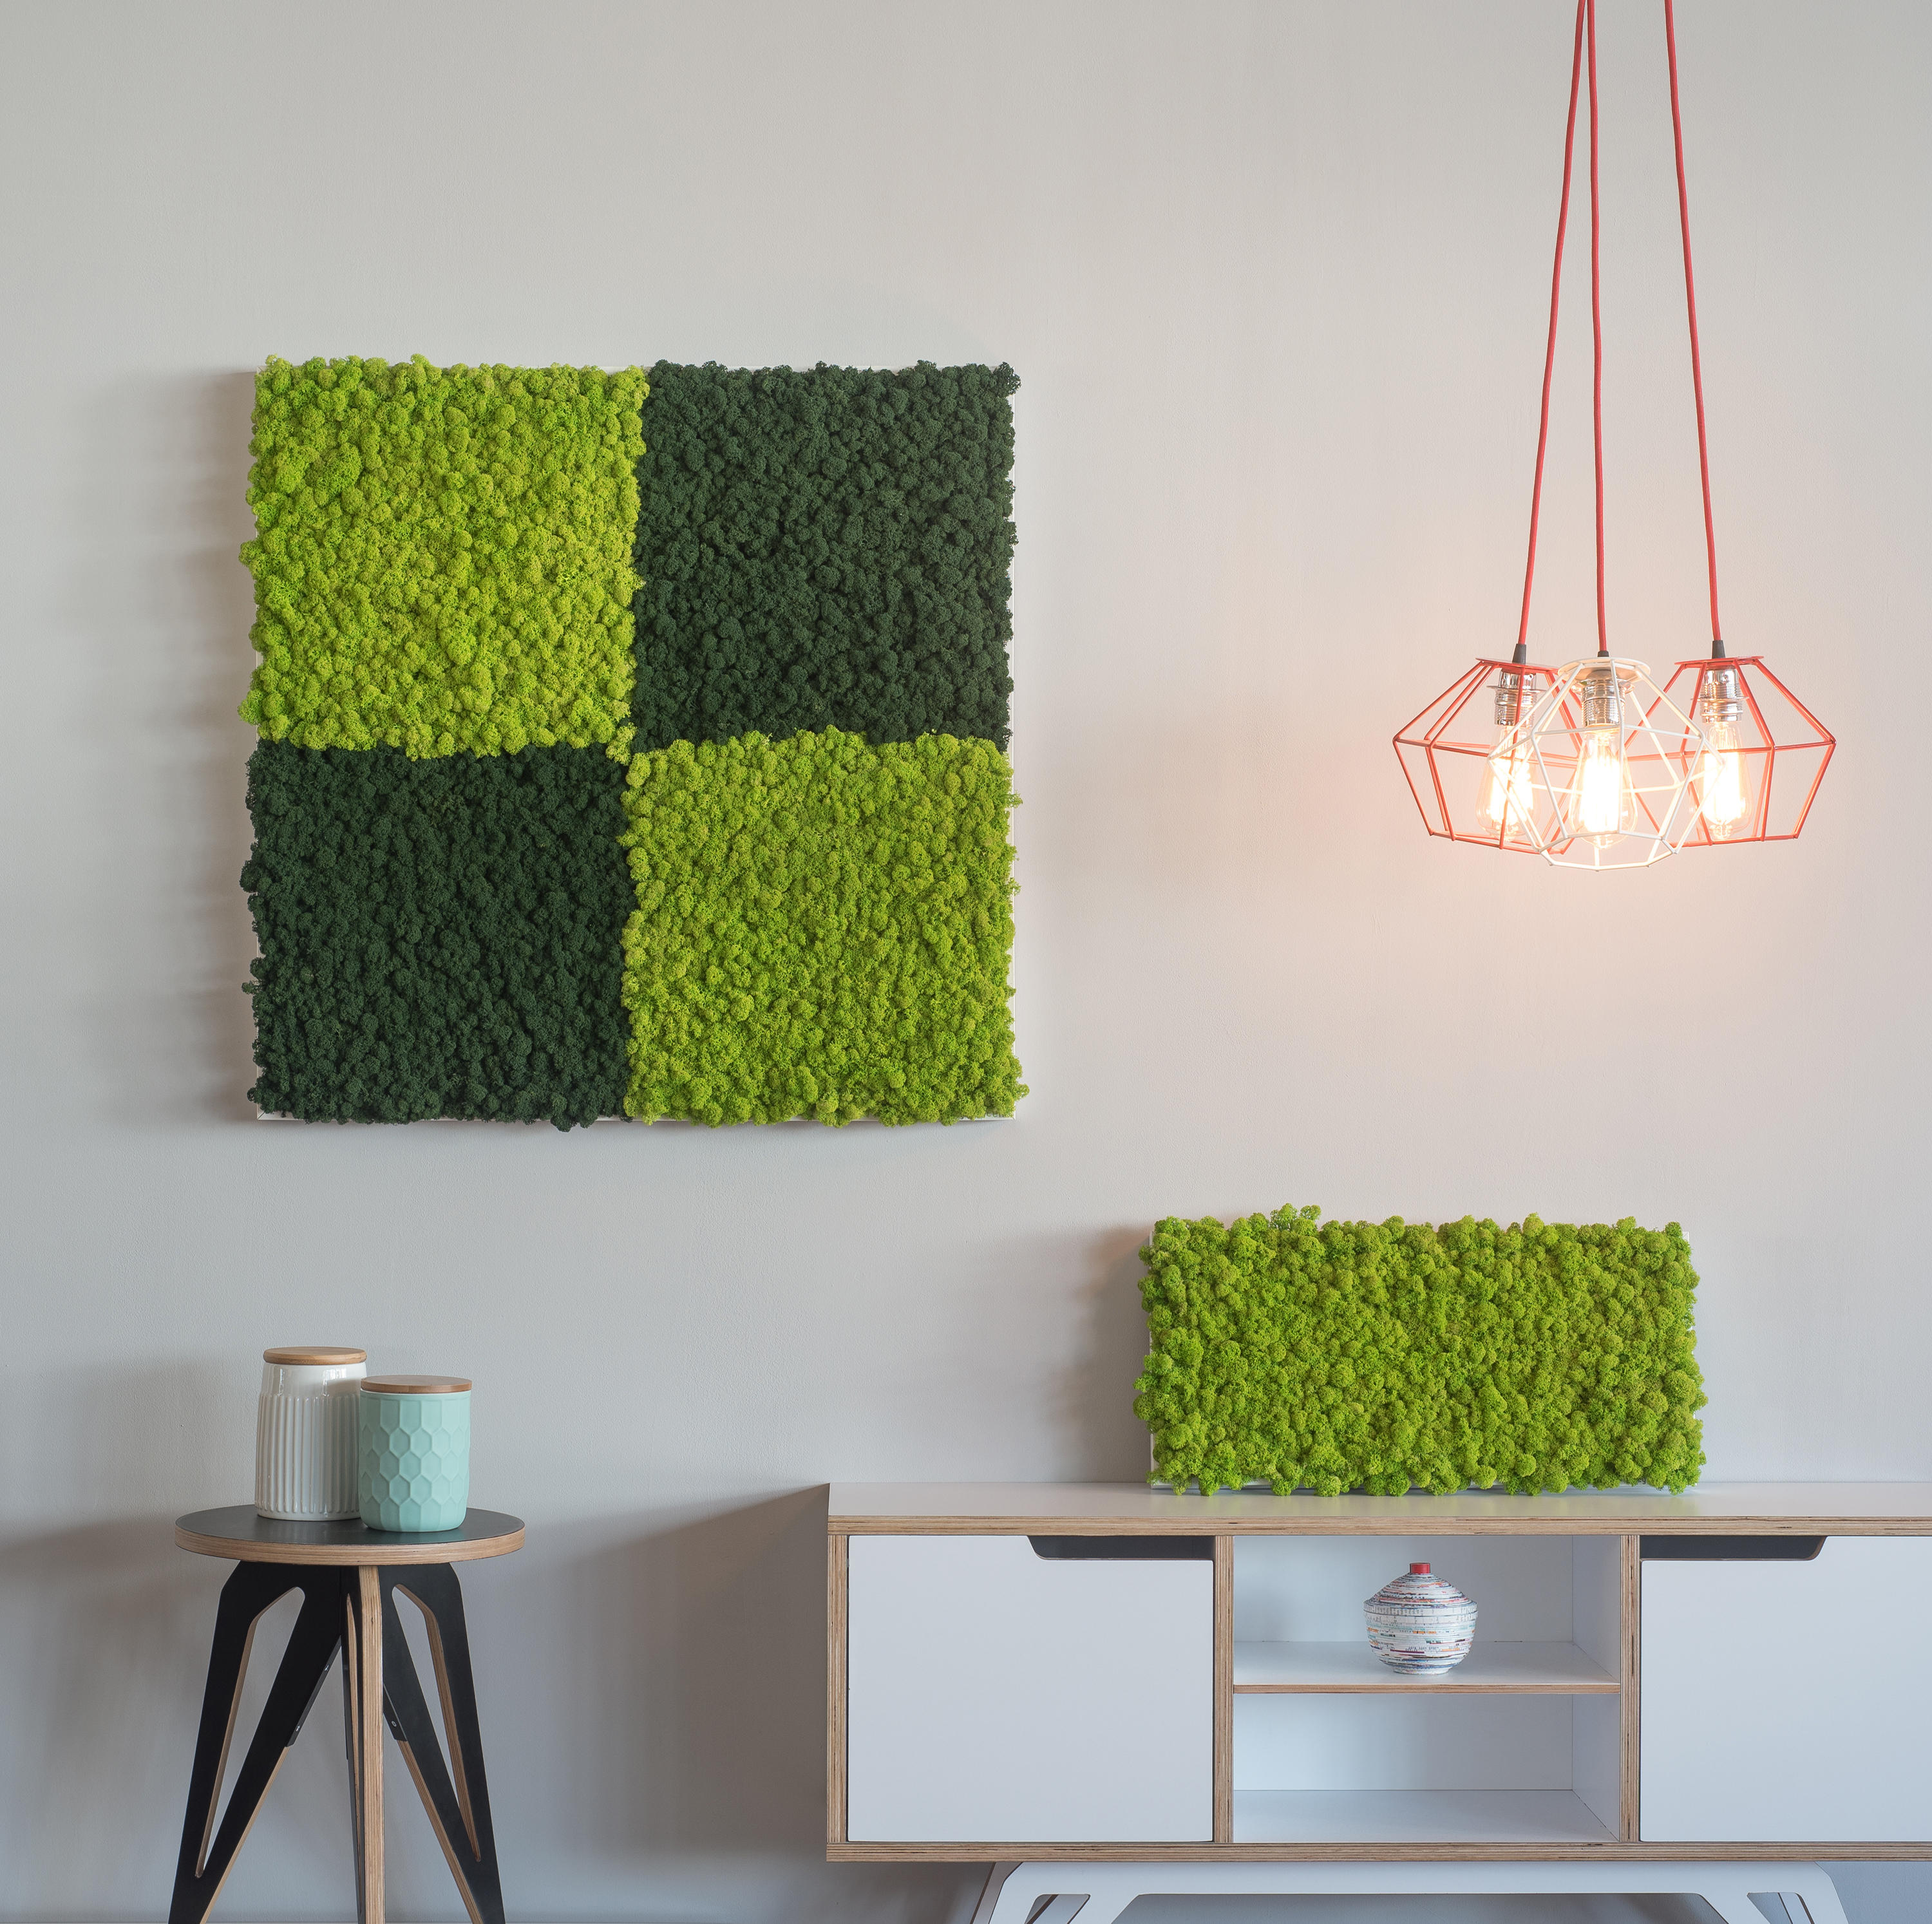 Natural Texture Of Reindeer Moss Decorative Green Moss Plant On The Wall  Background With Copy Space Picture From Organic Material Office Style  Interior Design Elements Stock Photo - Download Image Now - iStock